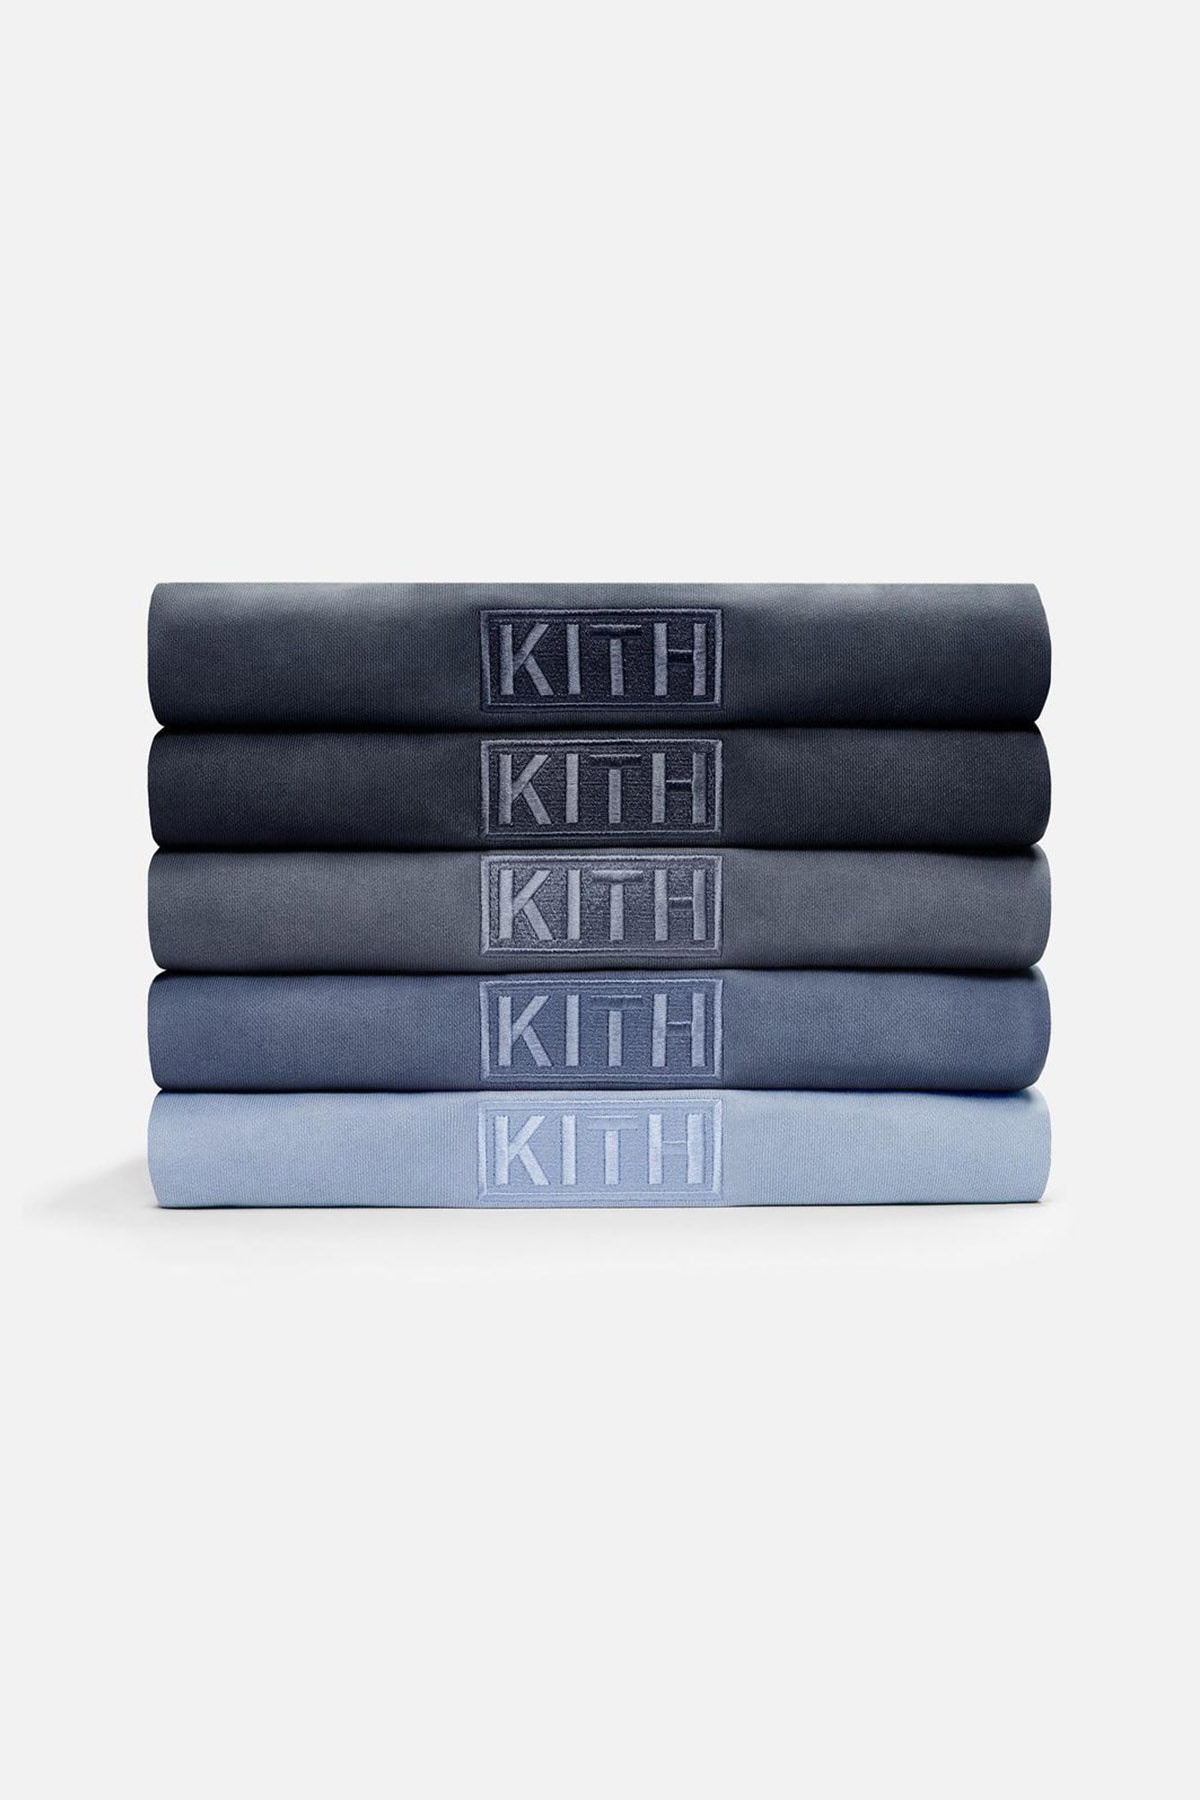 KITH 30 color Hoodie The Palette special Collection